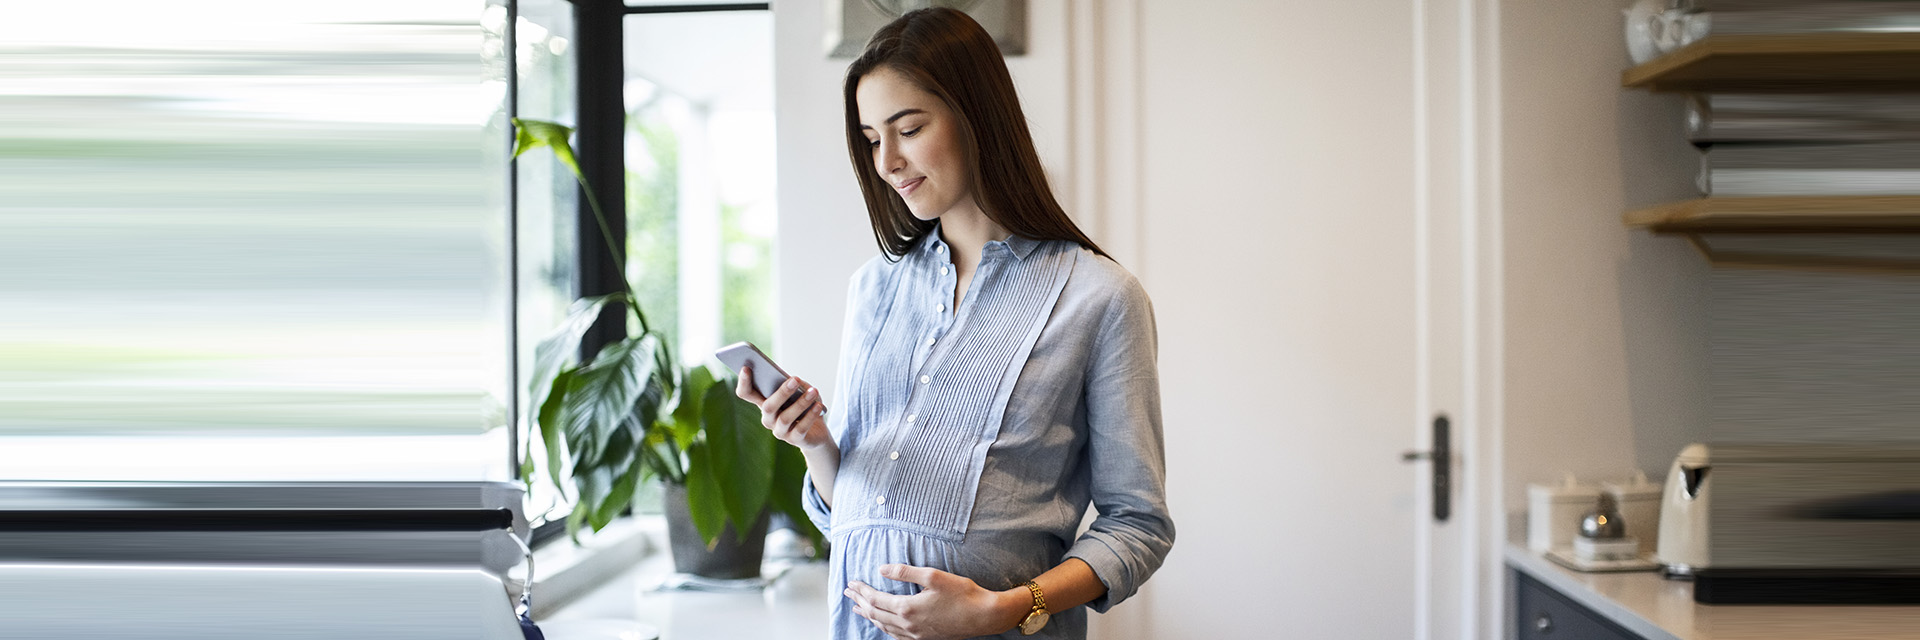 Pregnant Woman Looking at Cell Phone